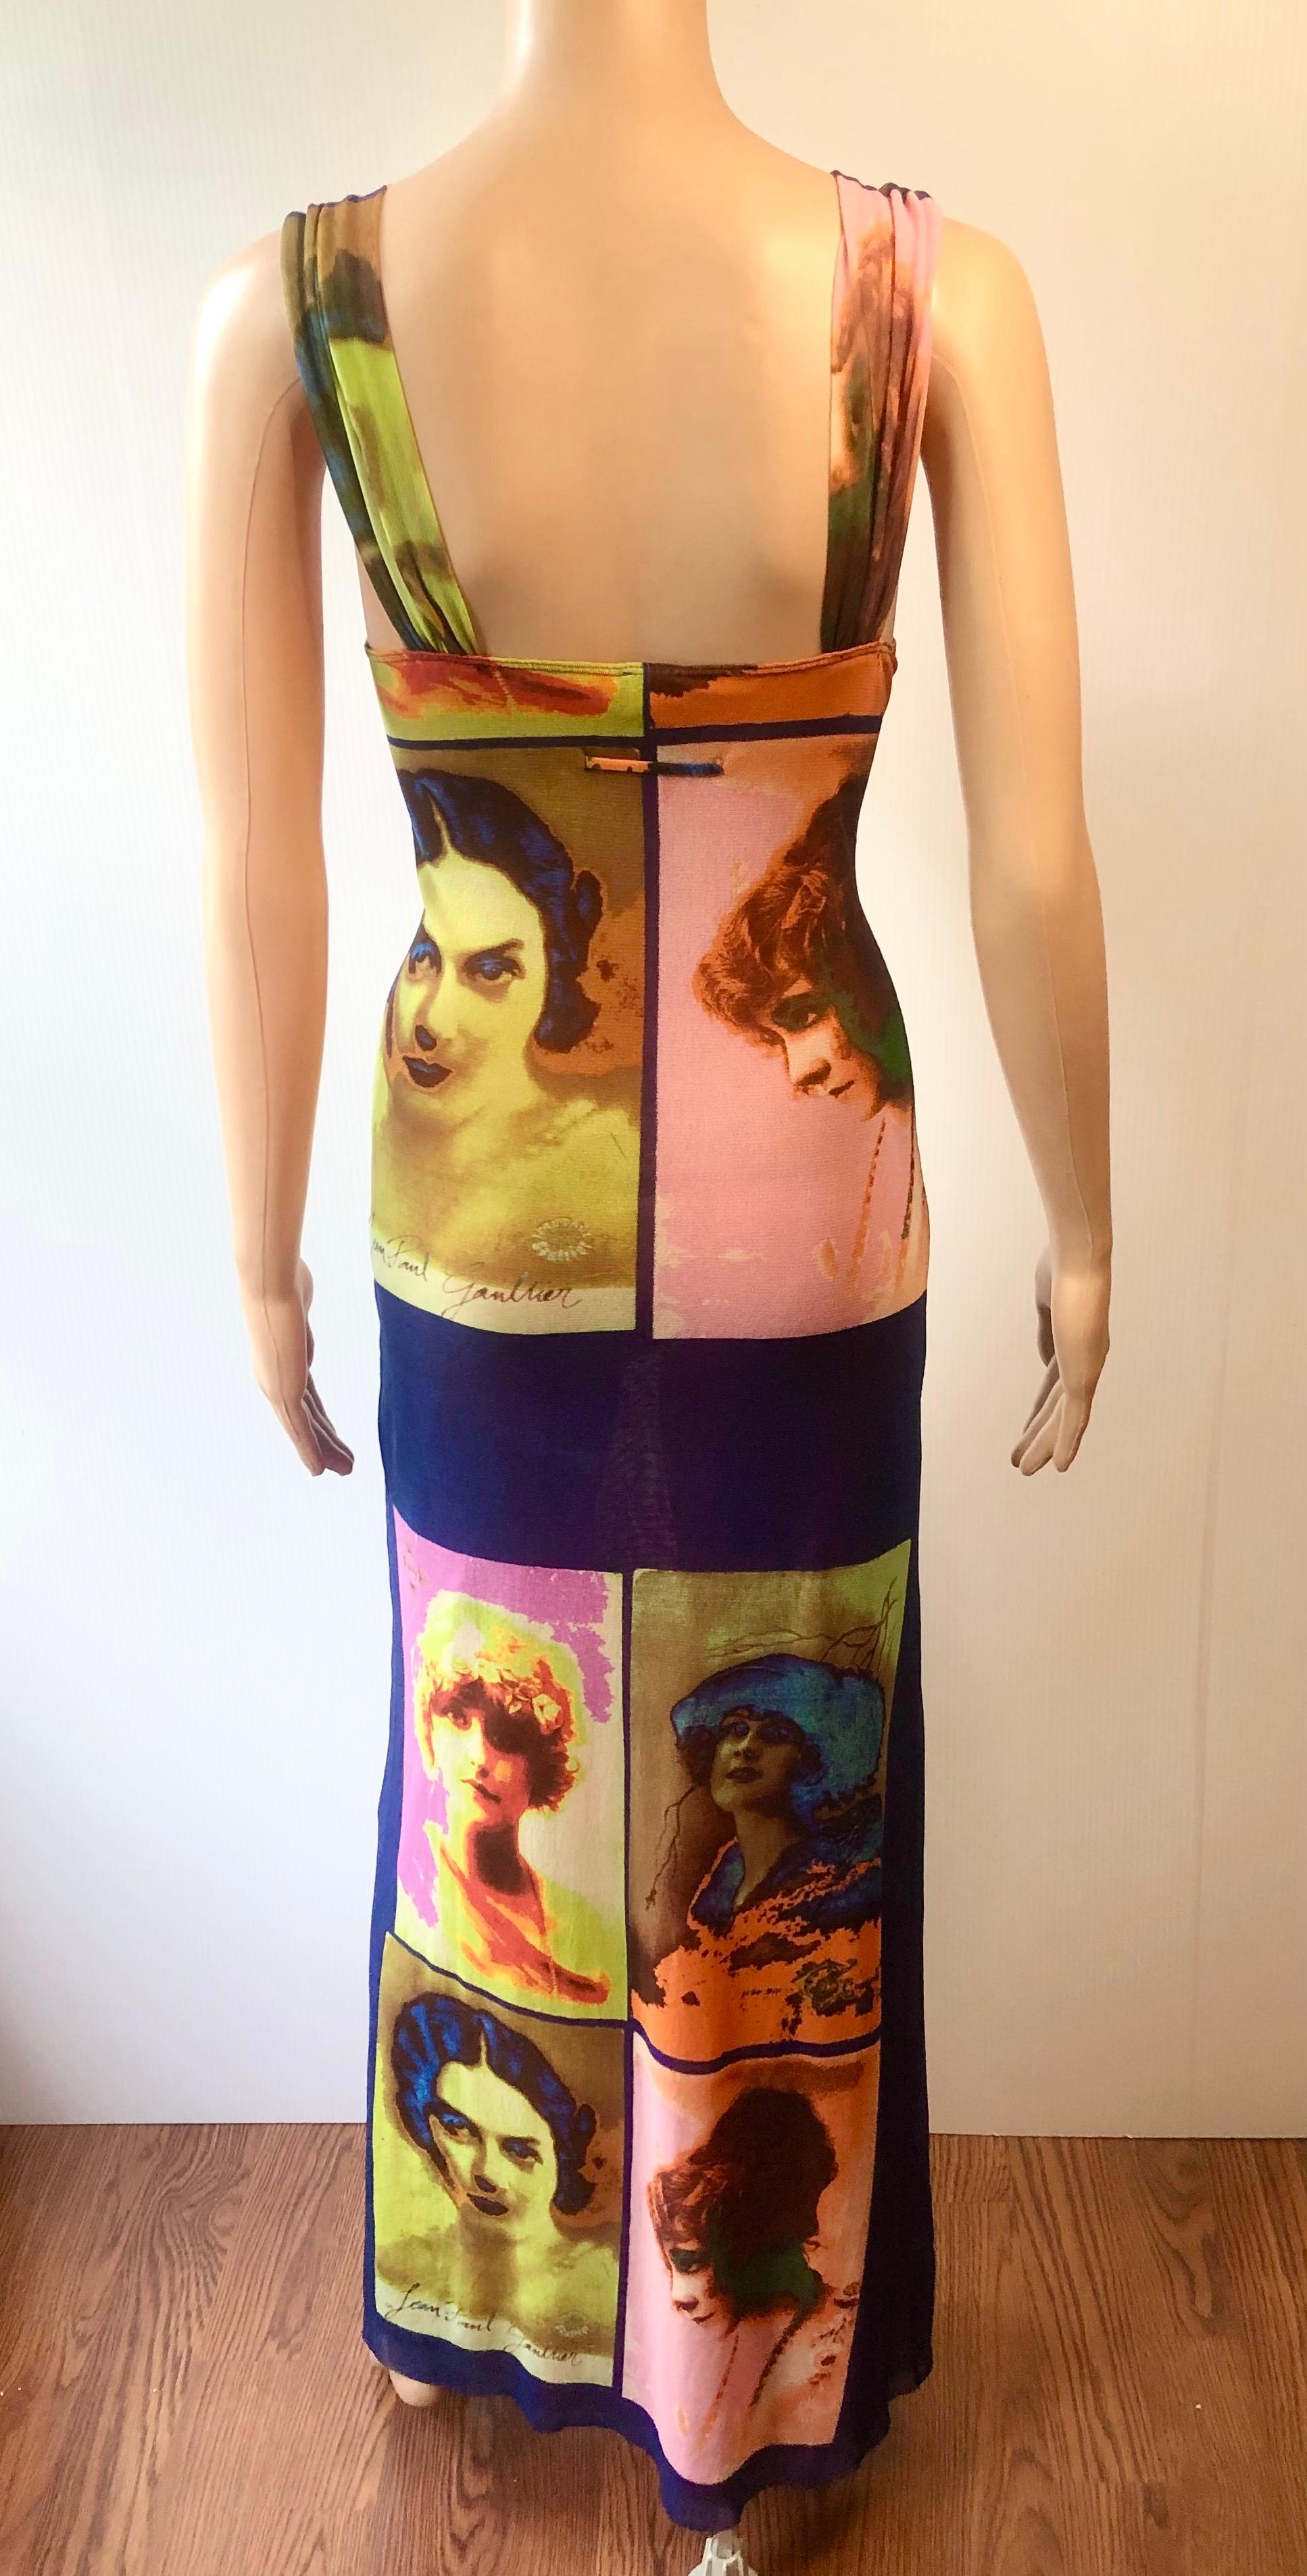 Jean Paul Gaultier Soleil S/S 2002 Vintage “Portraits” Mesh Maxi Dress 

Please note size tag has been removed. It will fit size S/M due to its stretchy mesh material.
